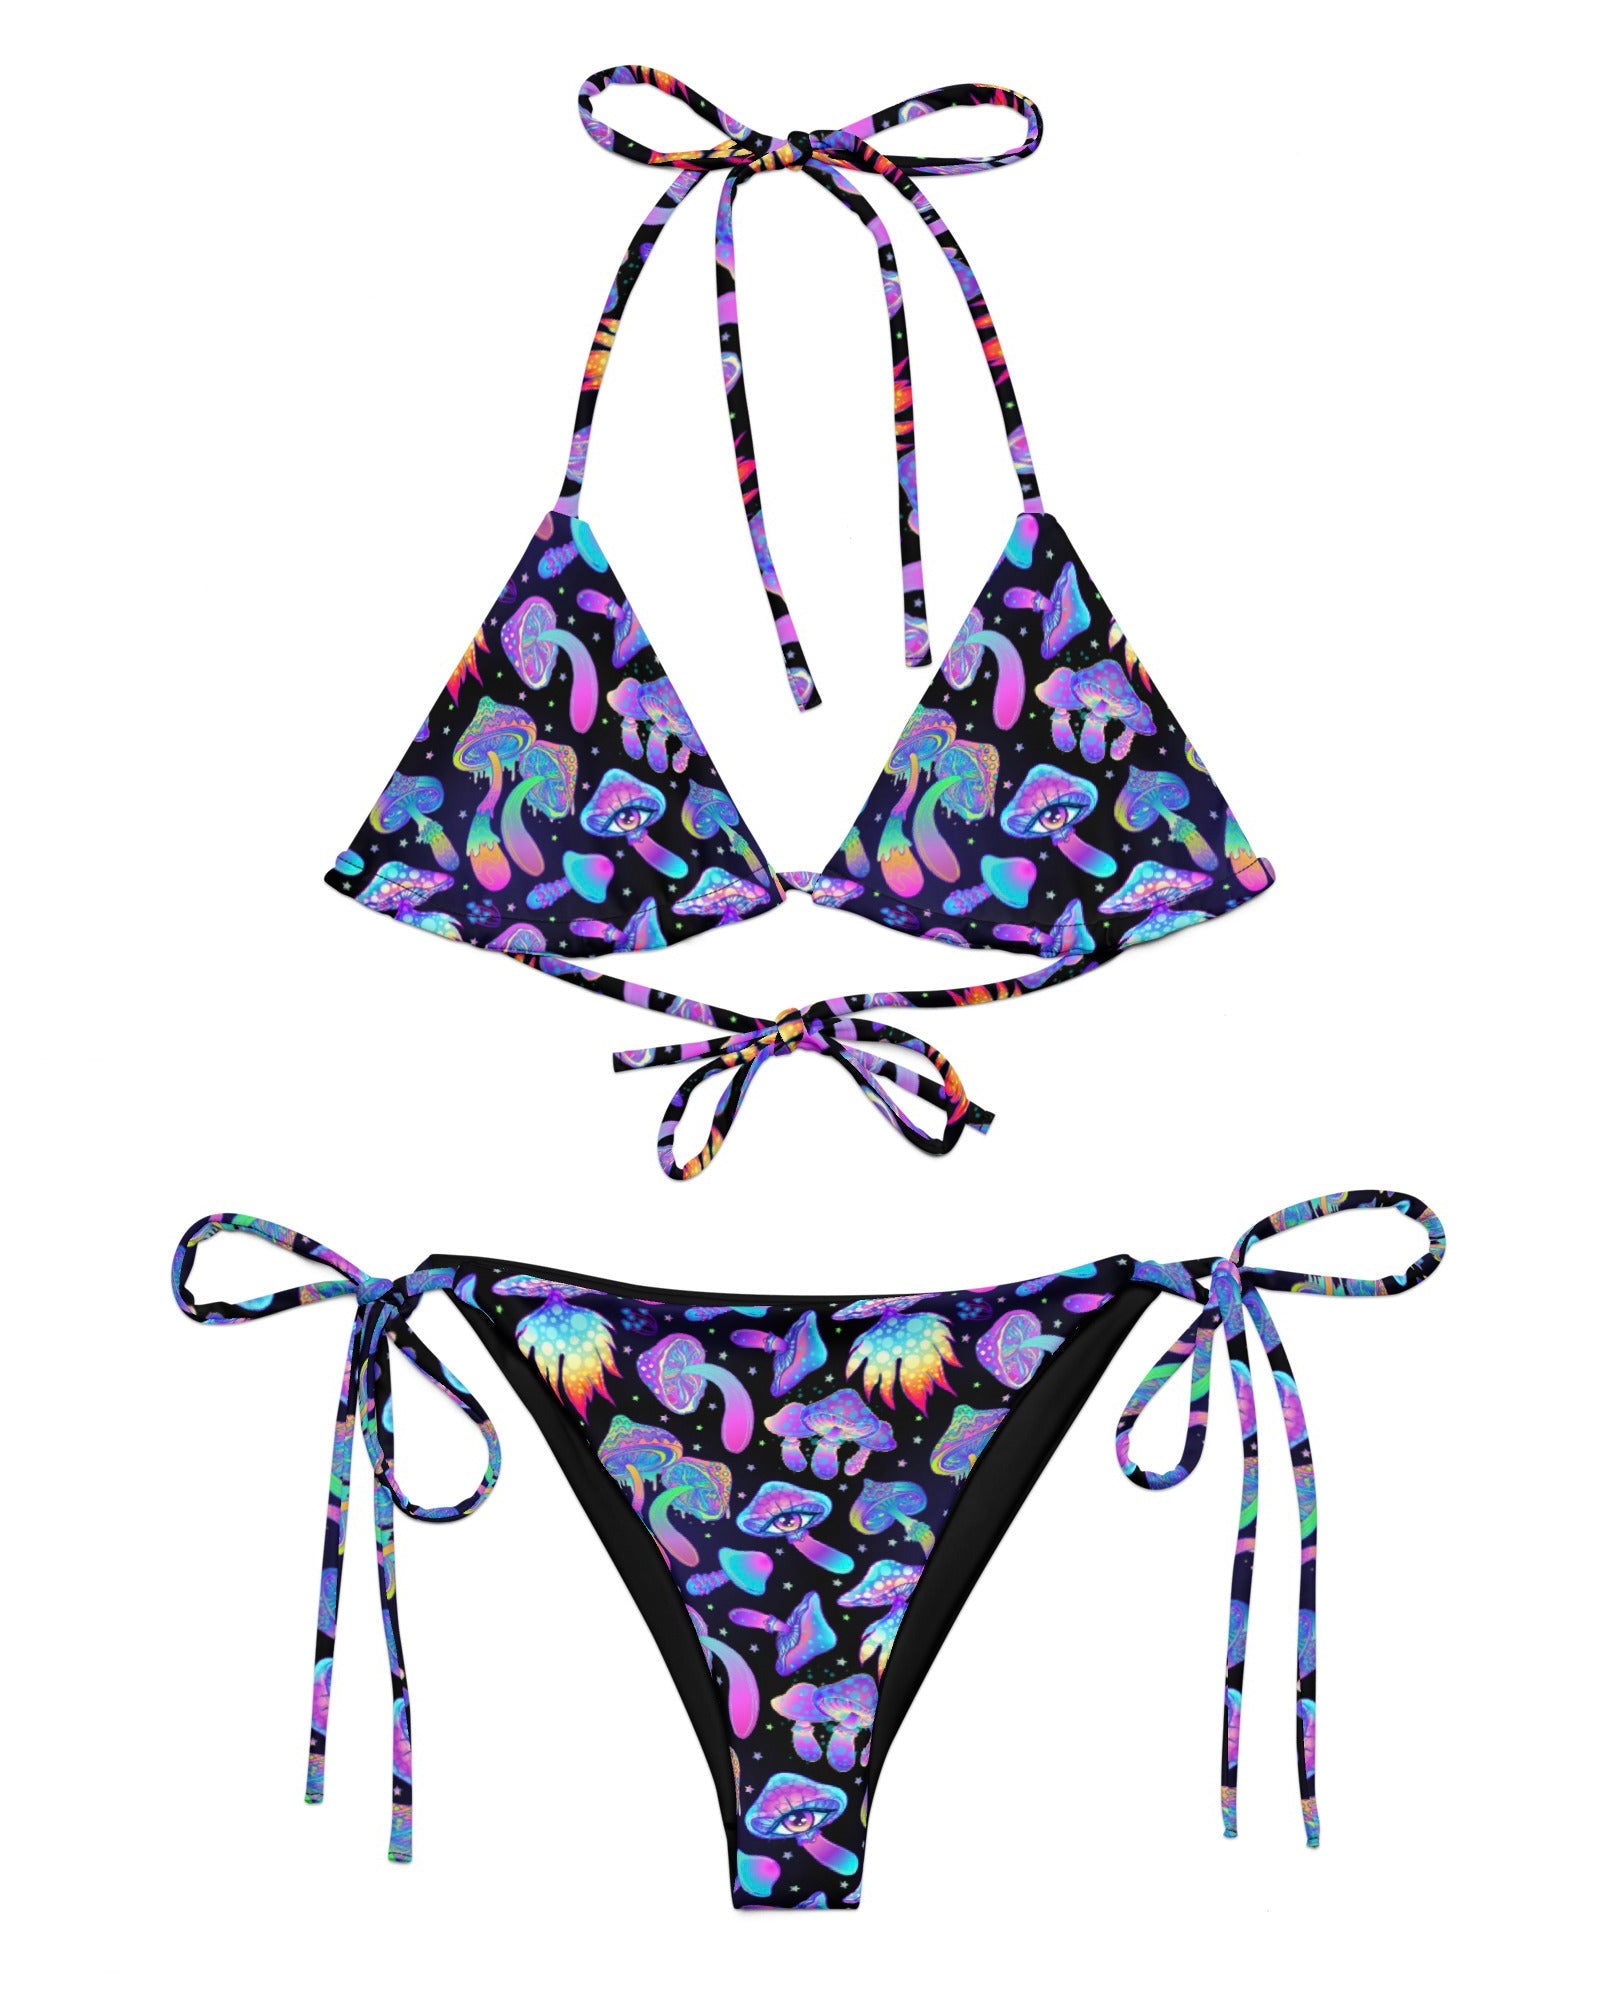 The Shroomin Black Triangle Top & Shroomin Black String Bottoms by One Stop Rave on a white background.